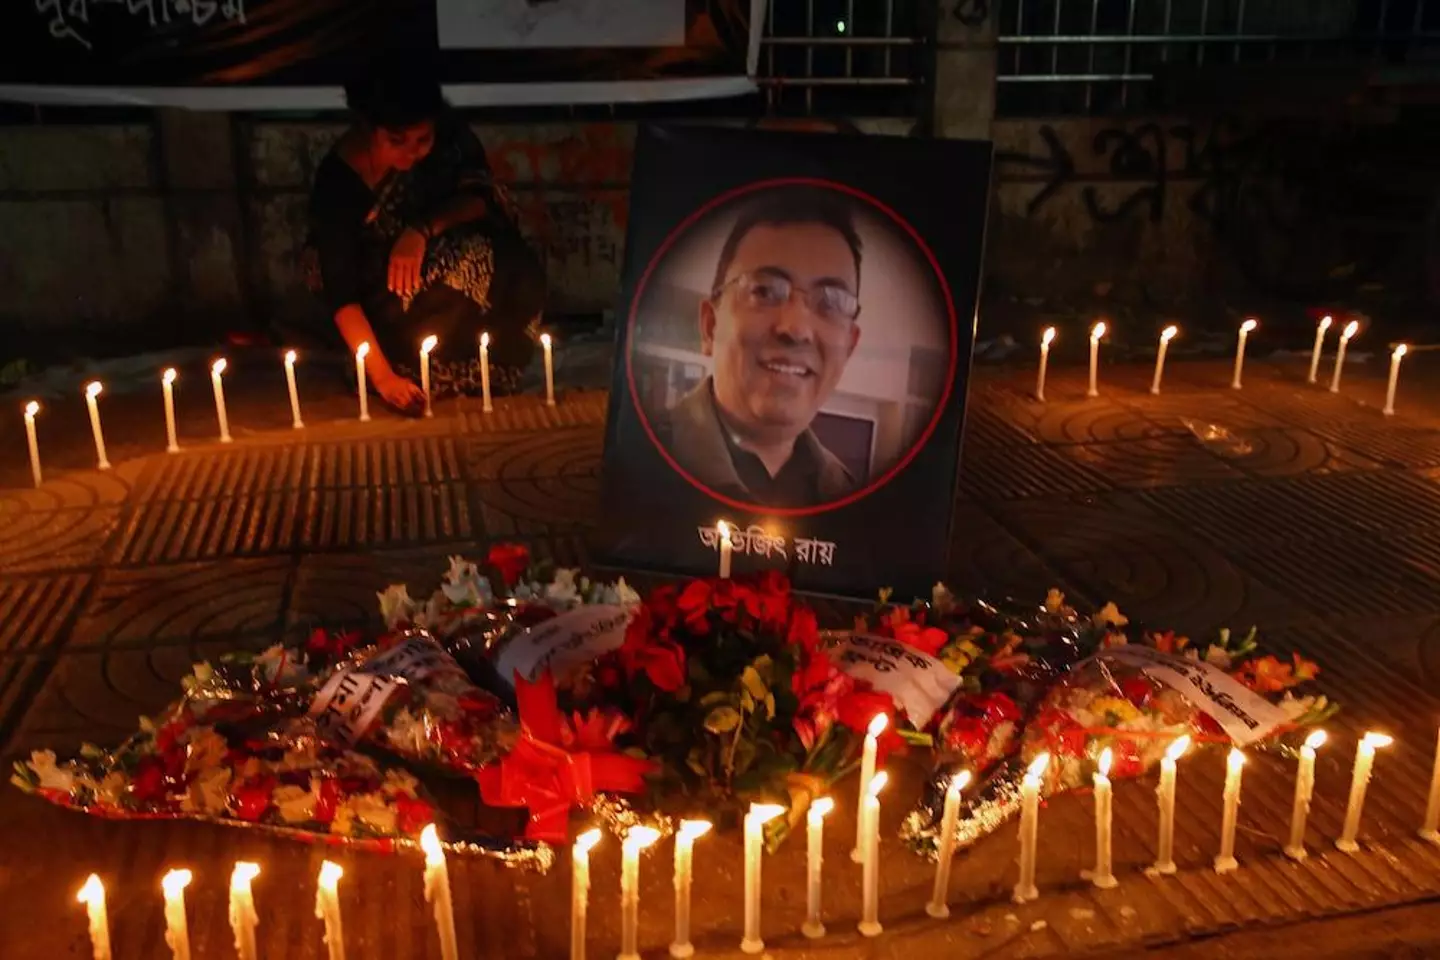 Blogger Avijit Roy was tragically killed in 2015.